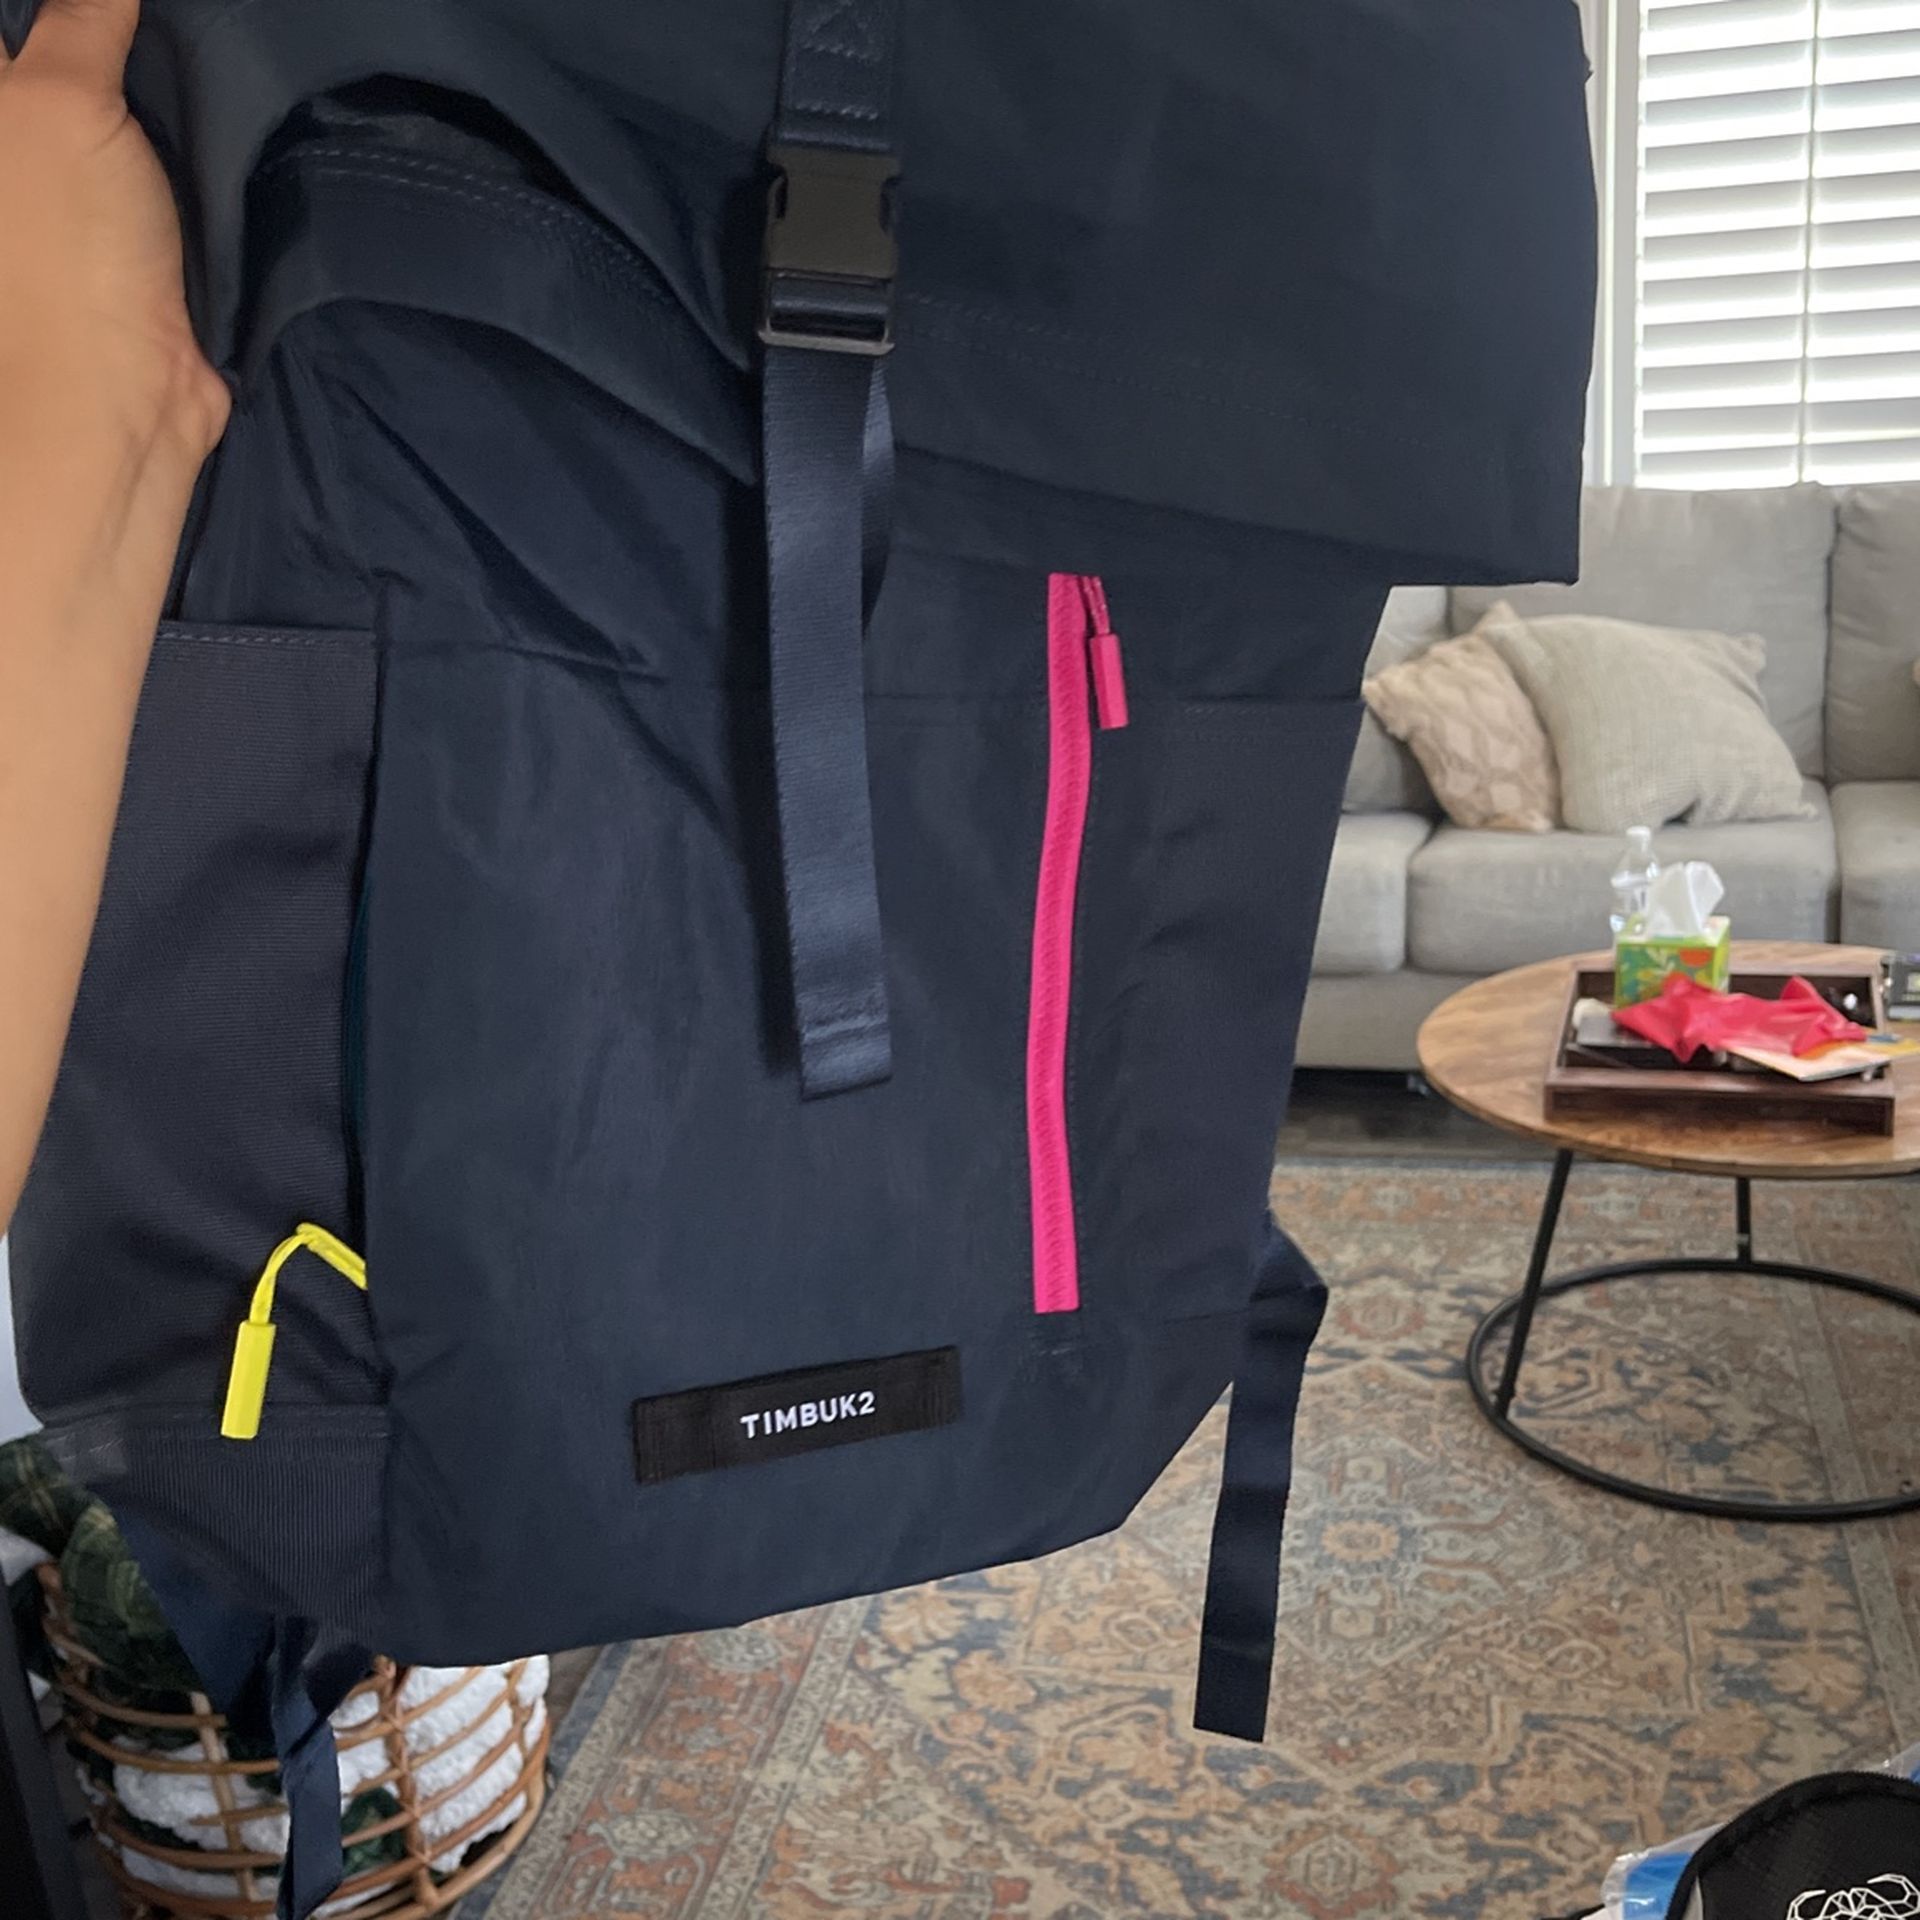 Timbuk2 Tuck Pack - Roll Top, Water-Resistant Laptop Backpack